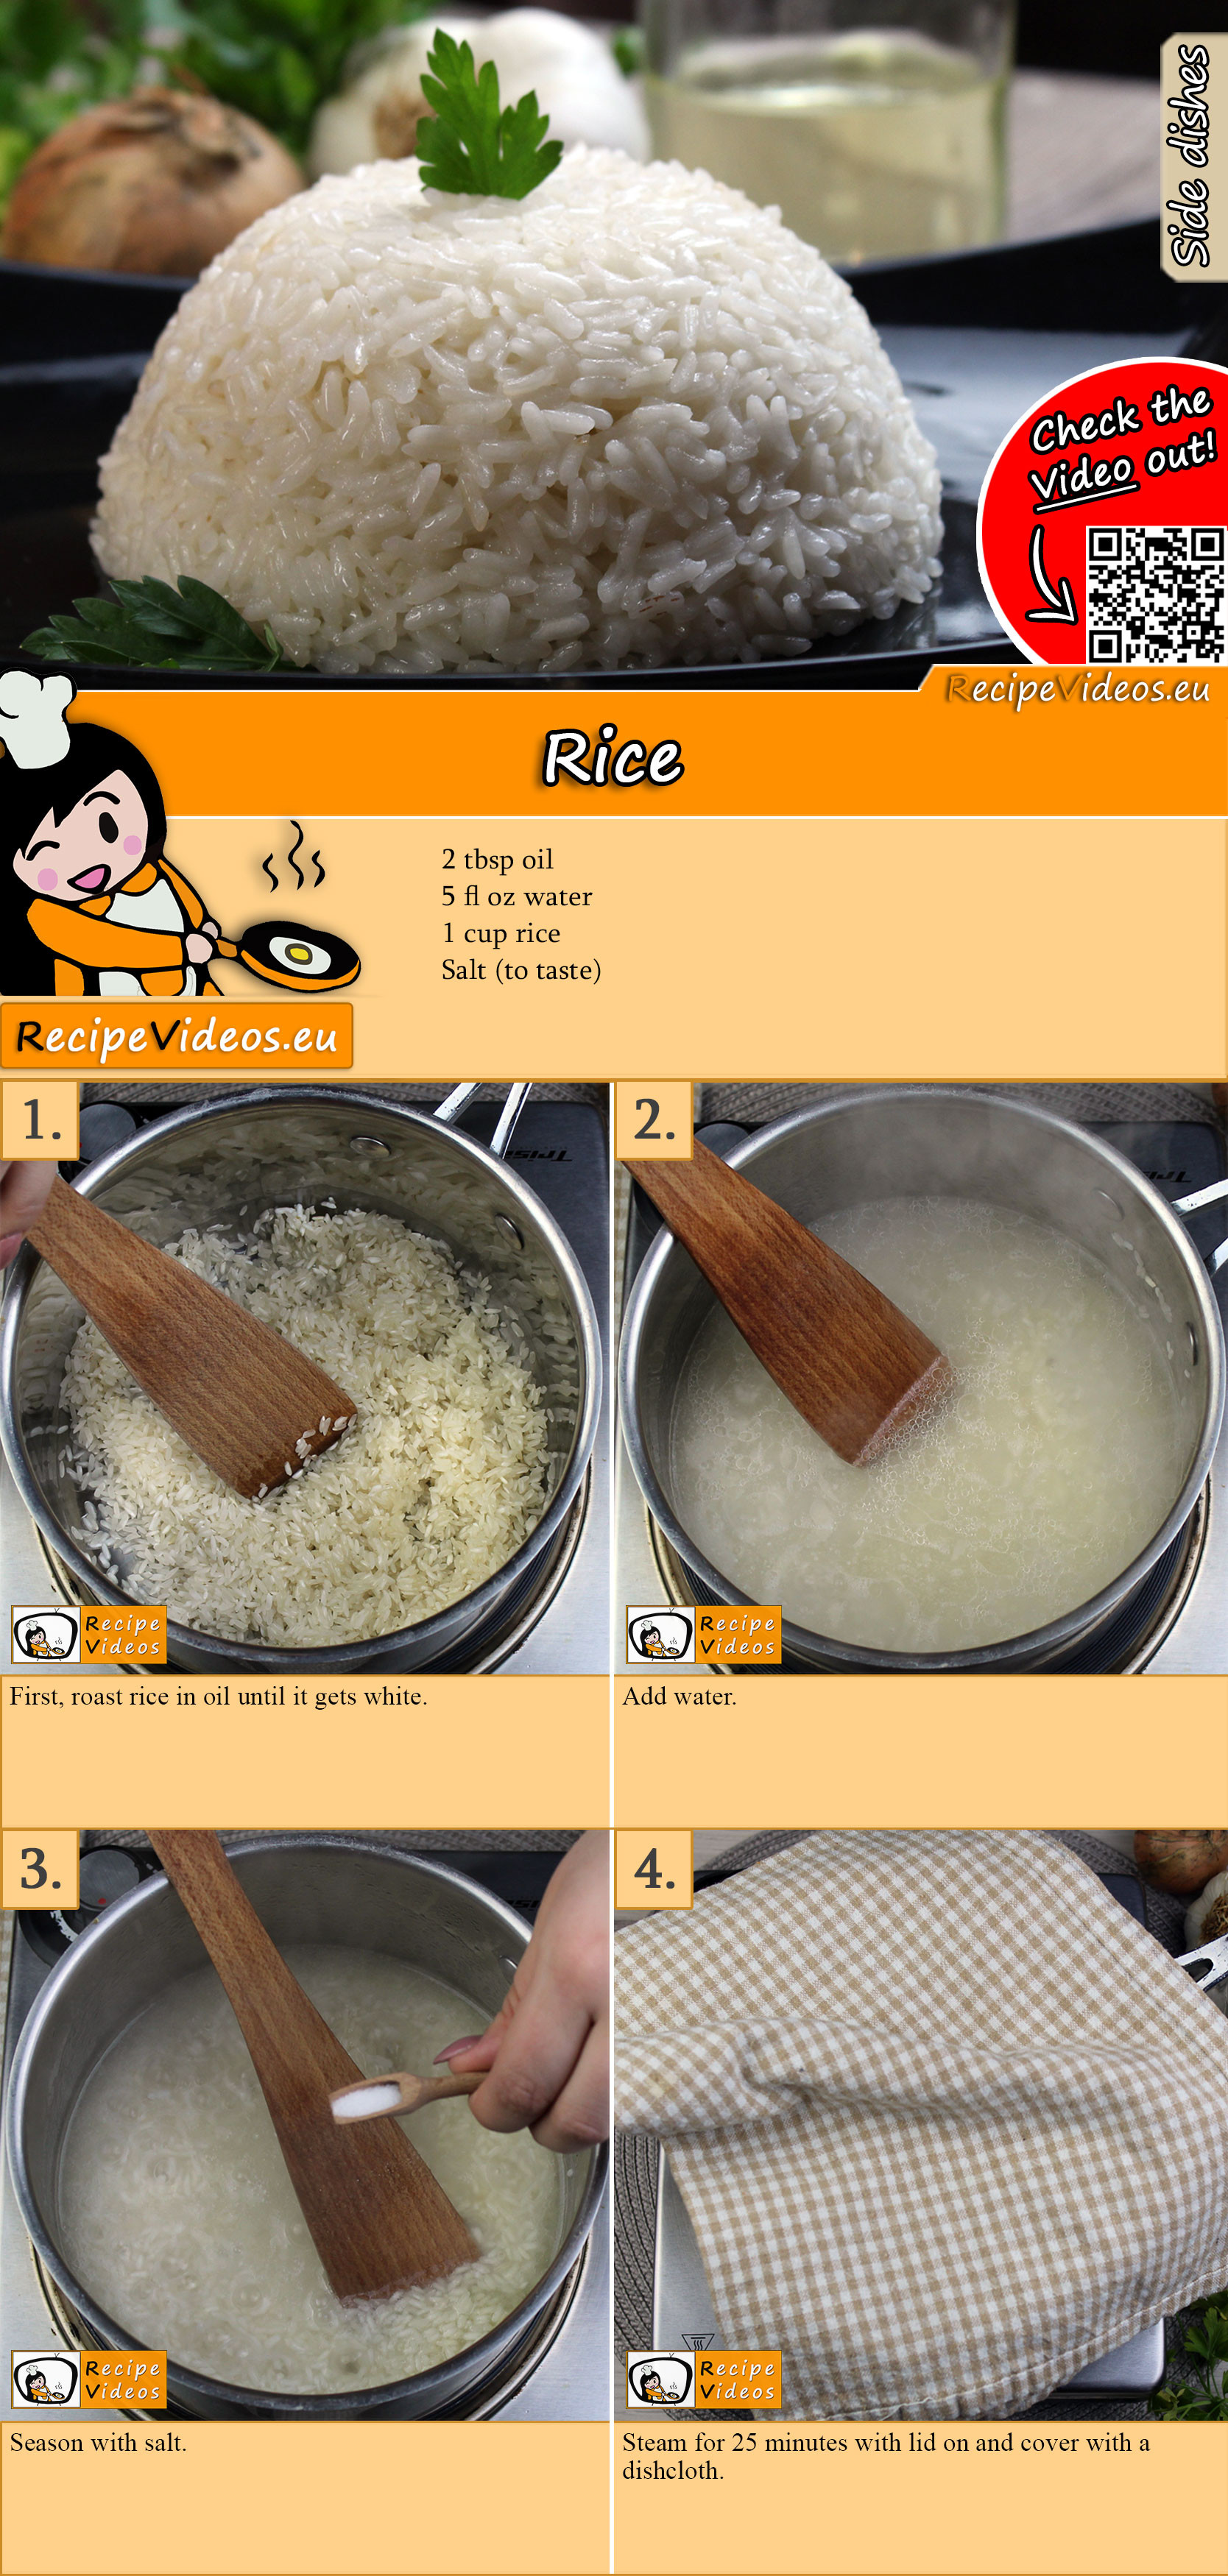 Rice recipe with video